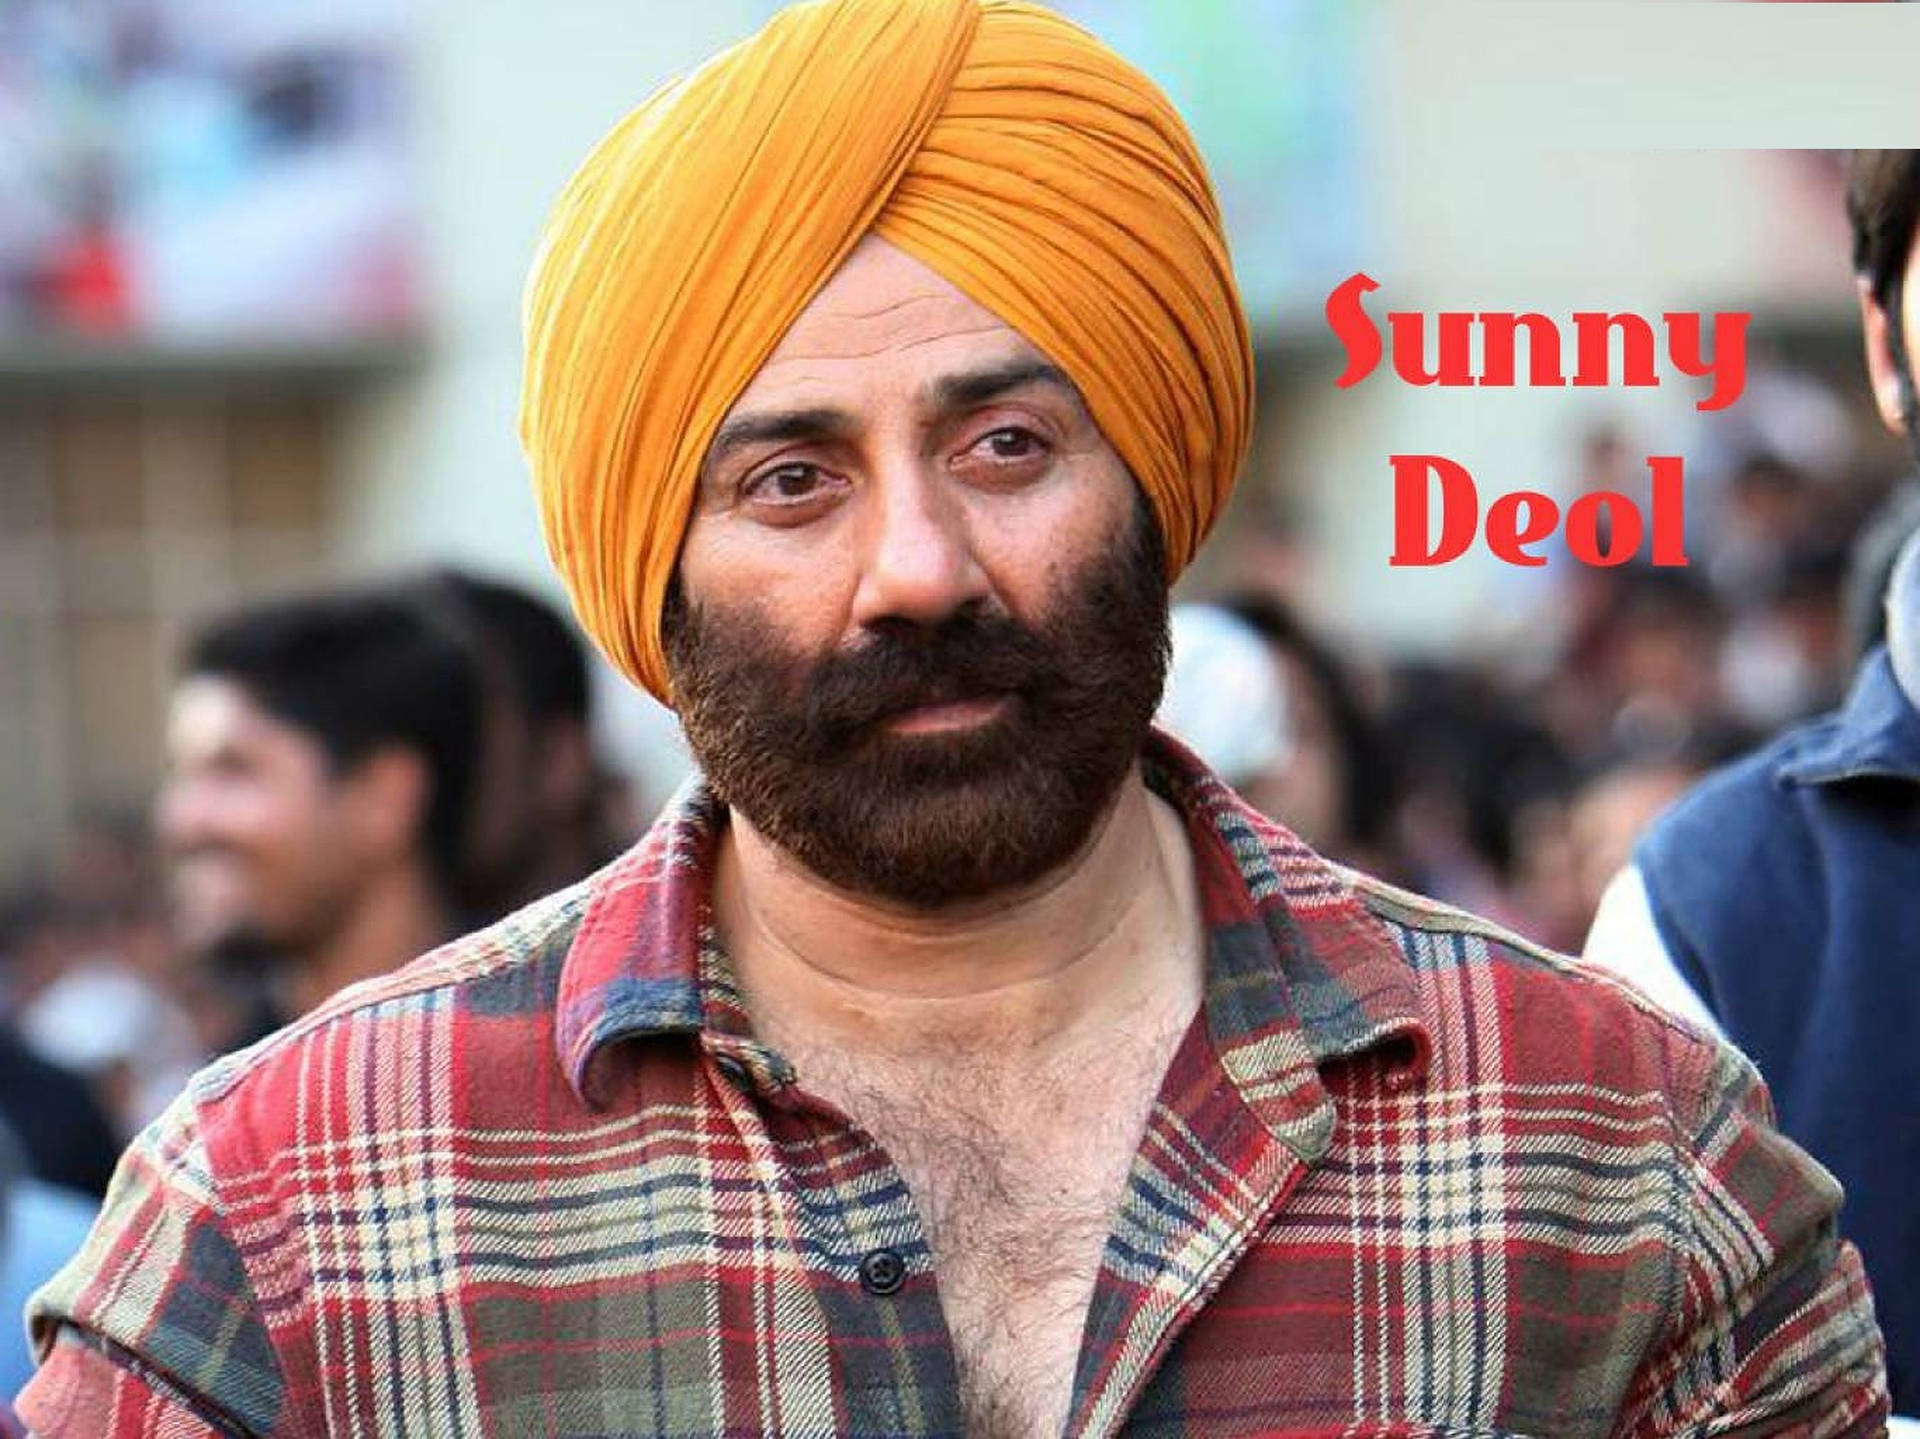 Sunny Deol Checkered Top Background